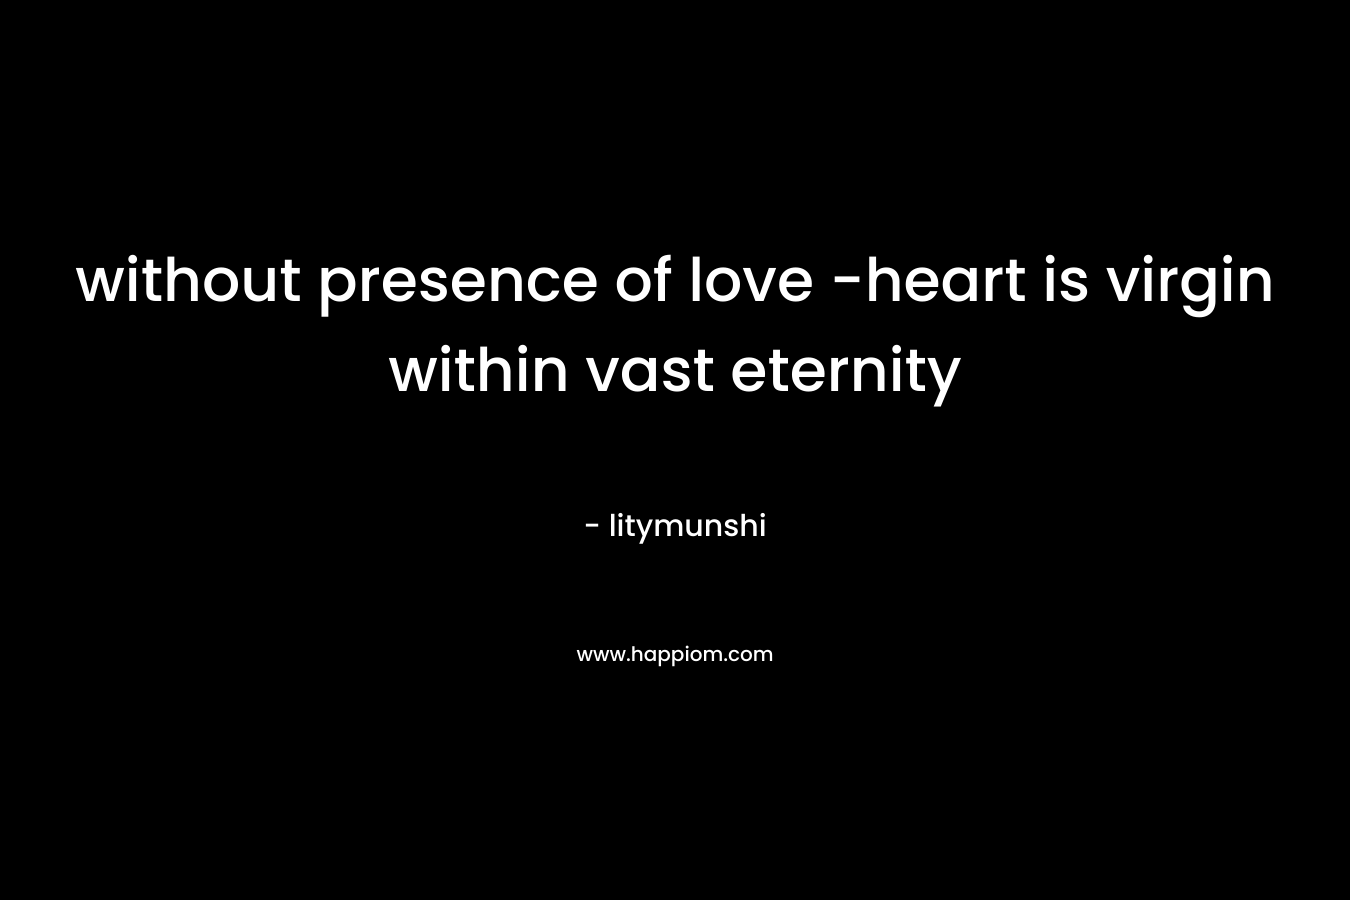 without presence of love -heart is virgin within vast eternity